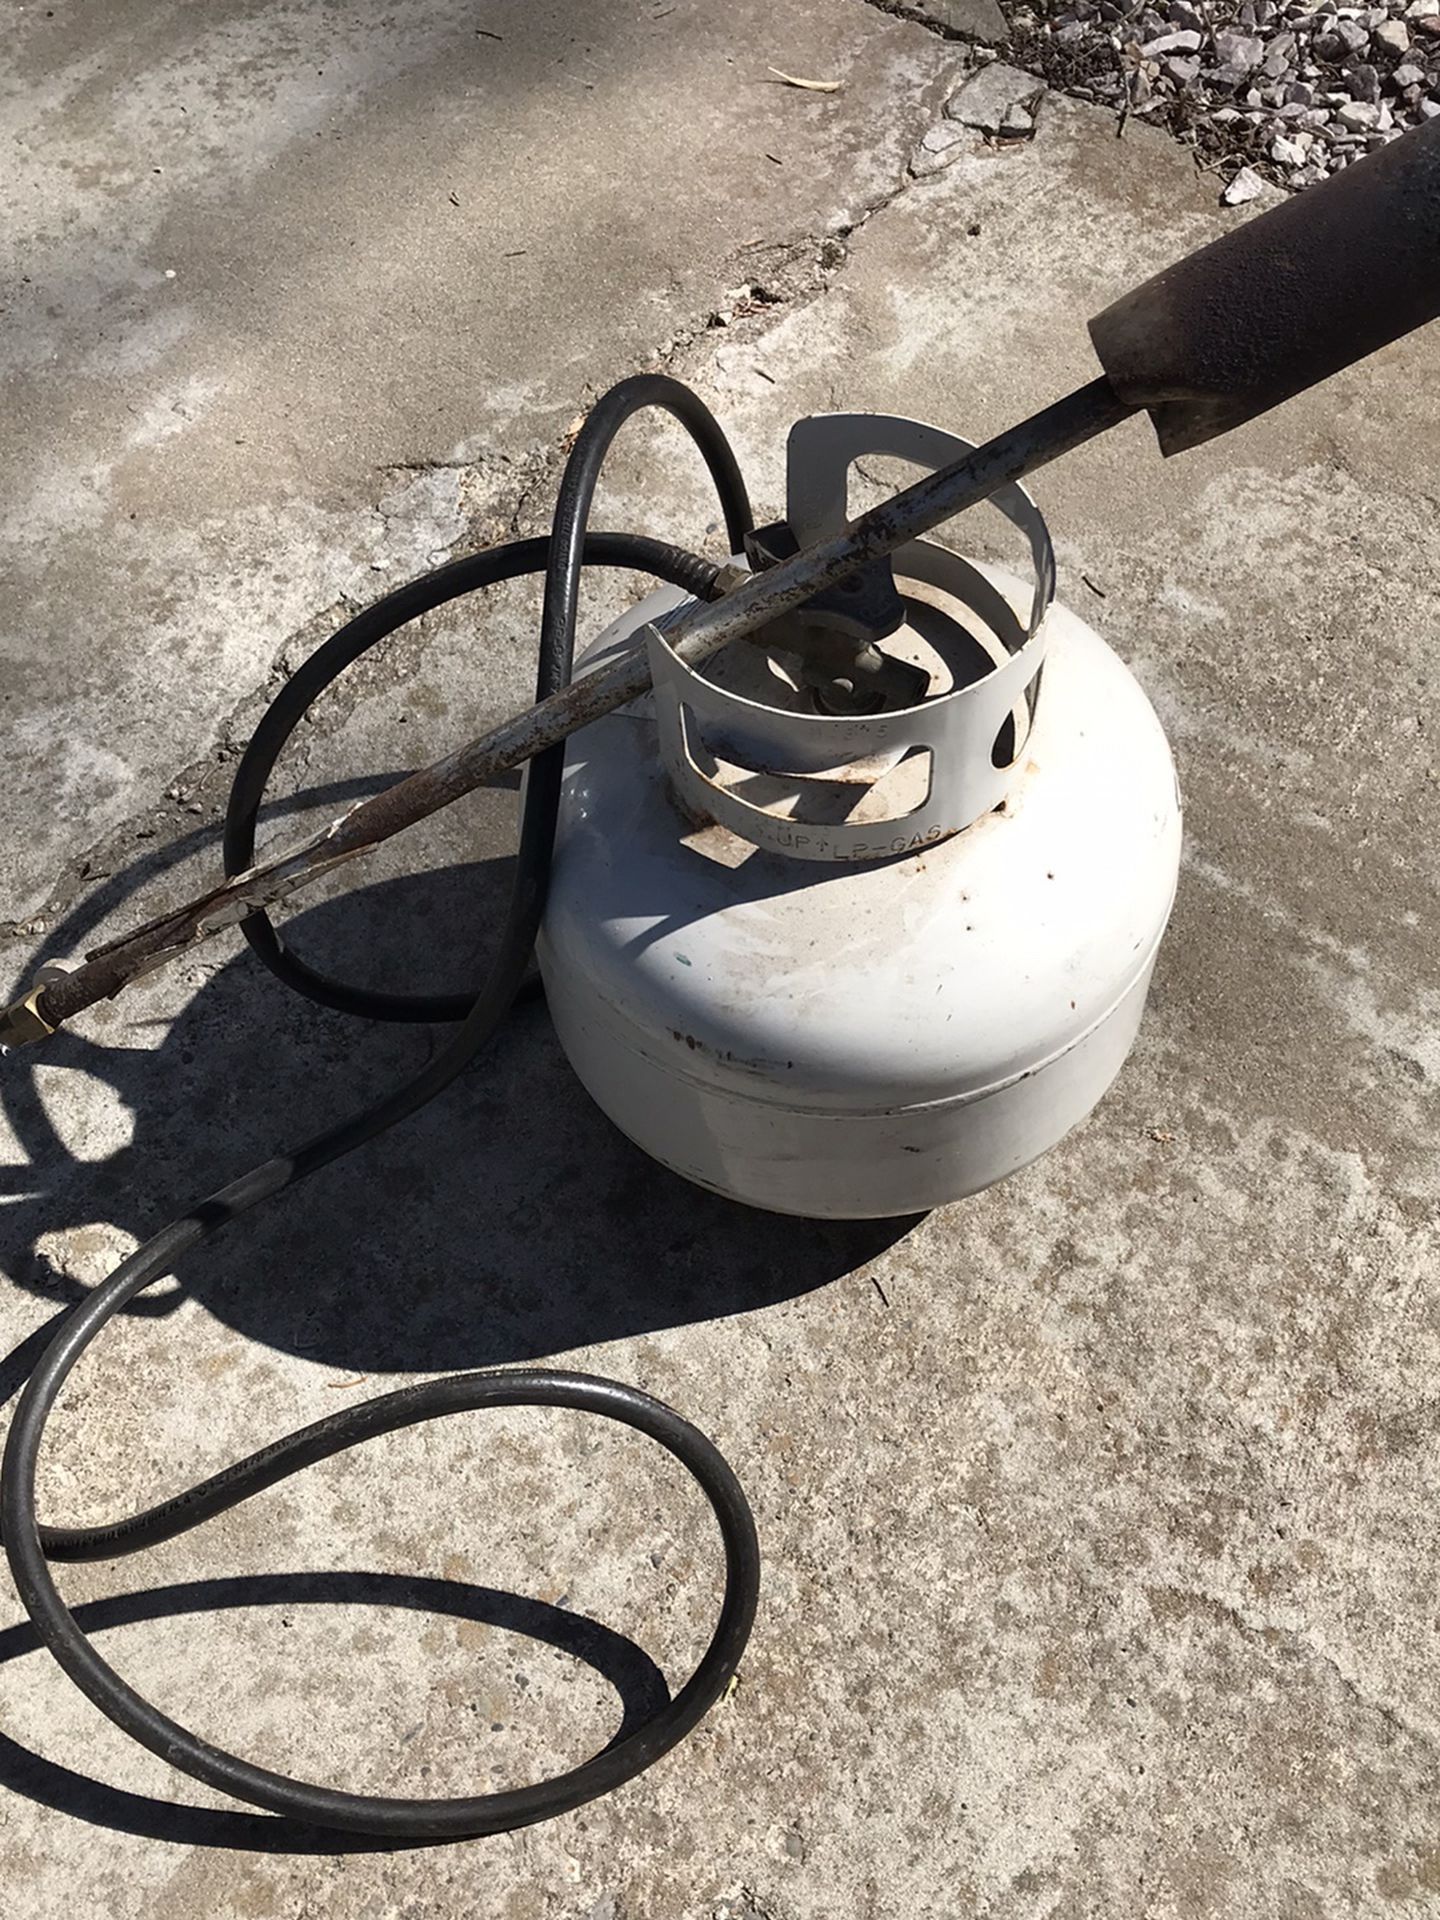 Small Propane Tank With Torch